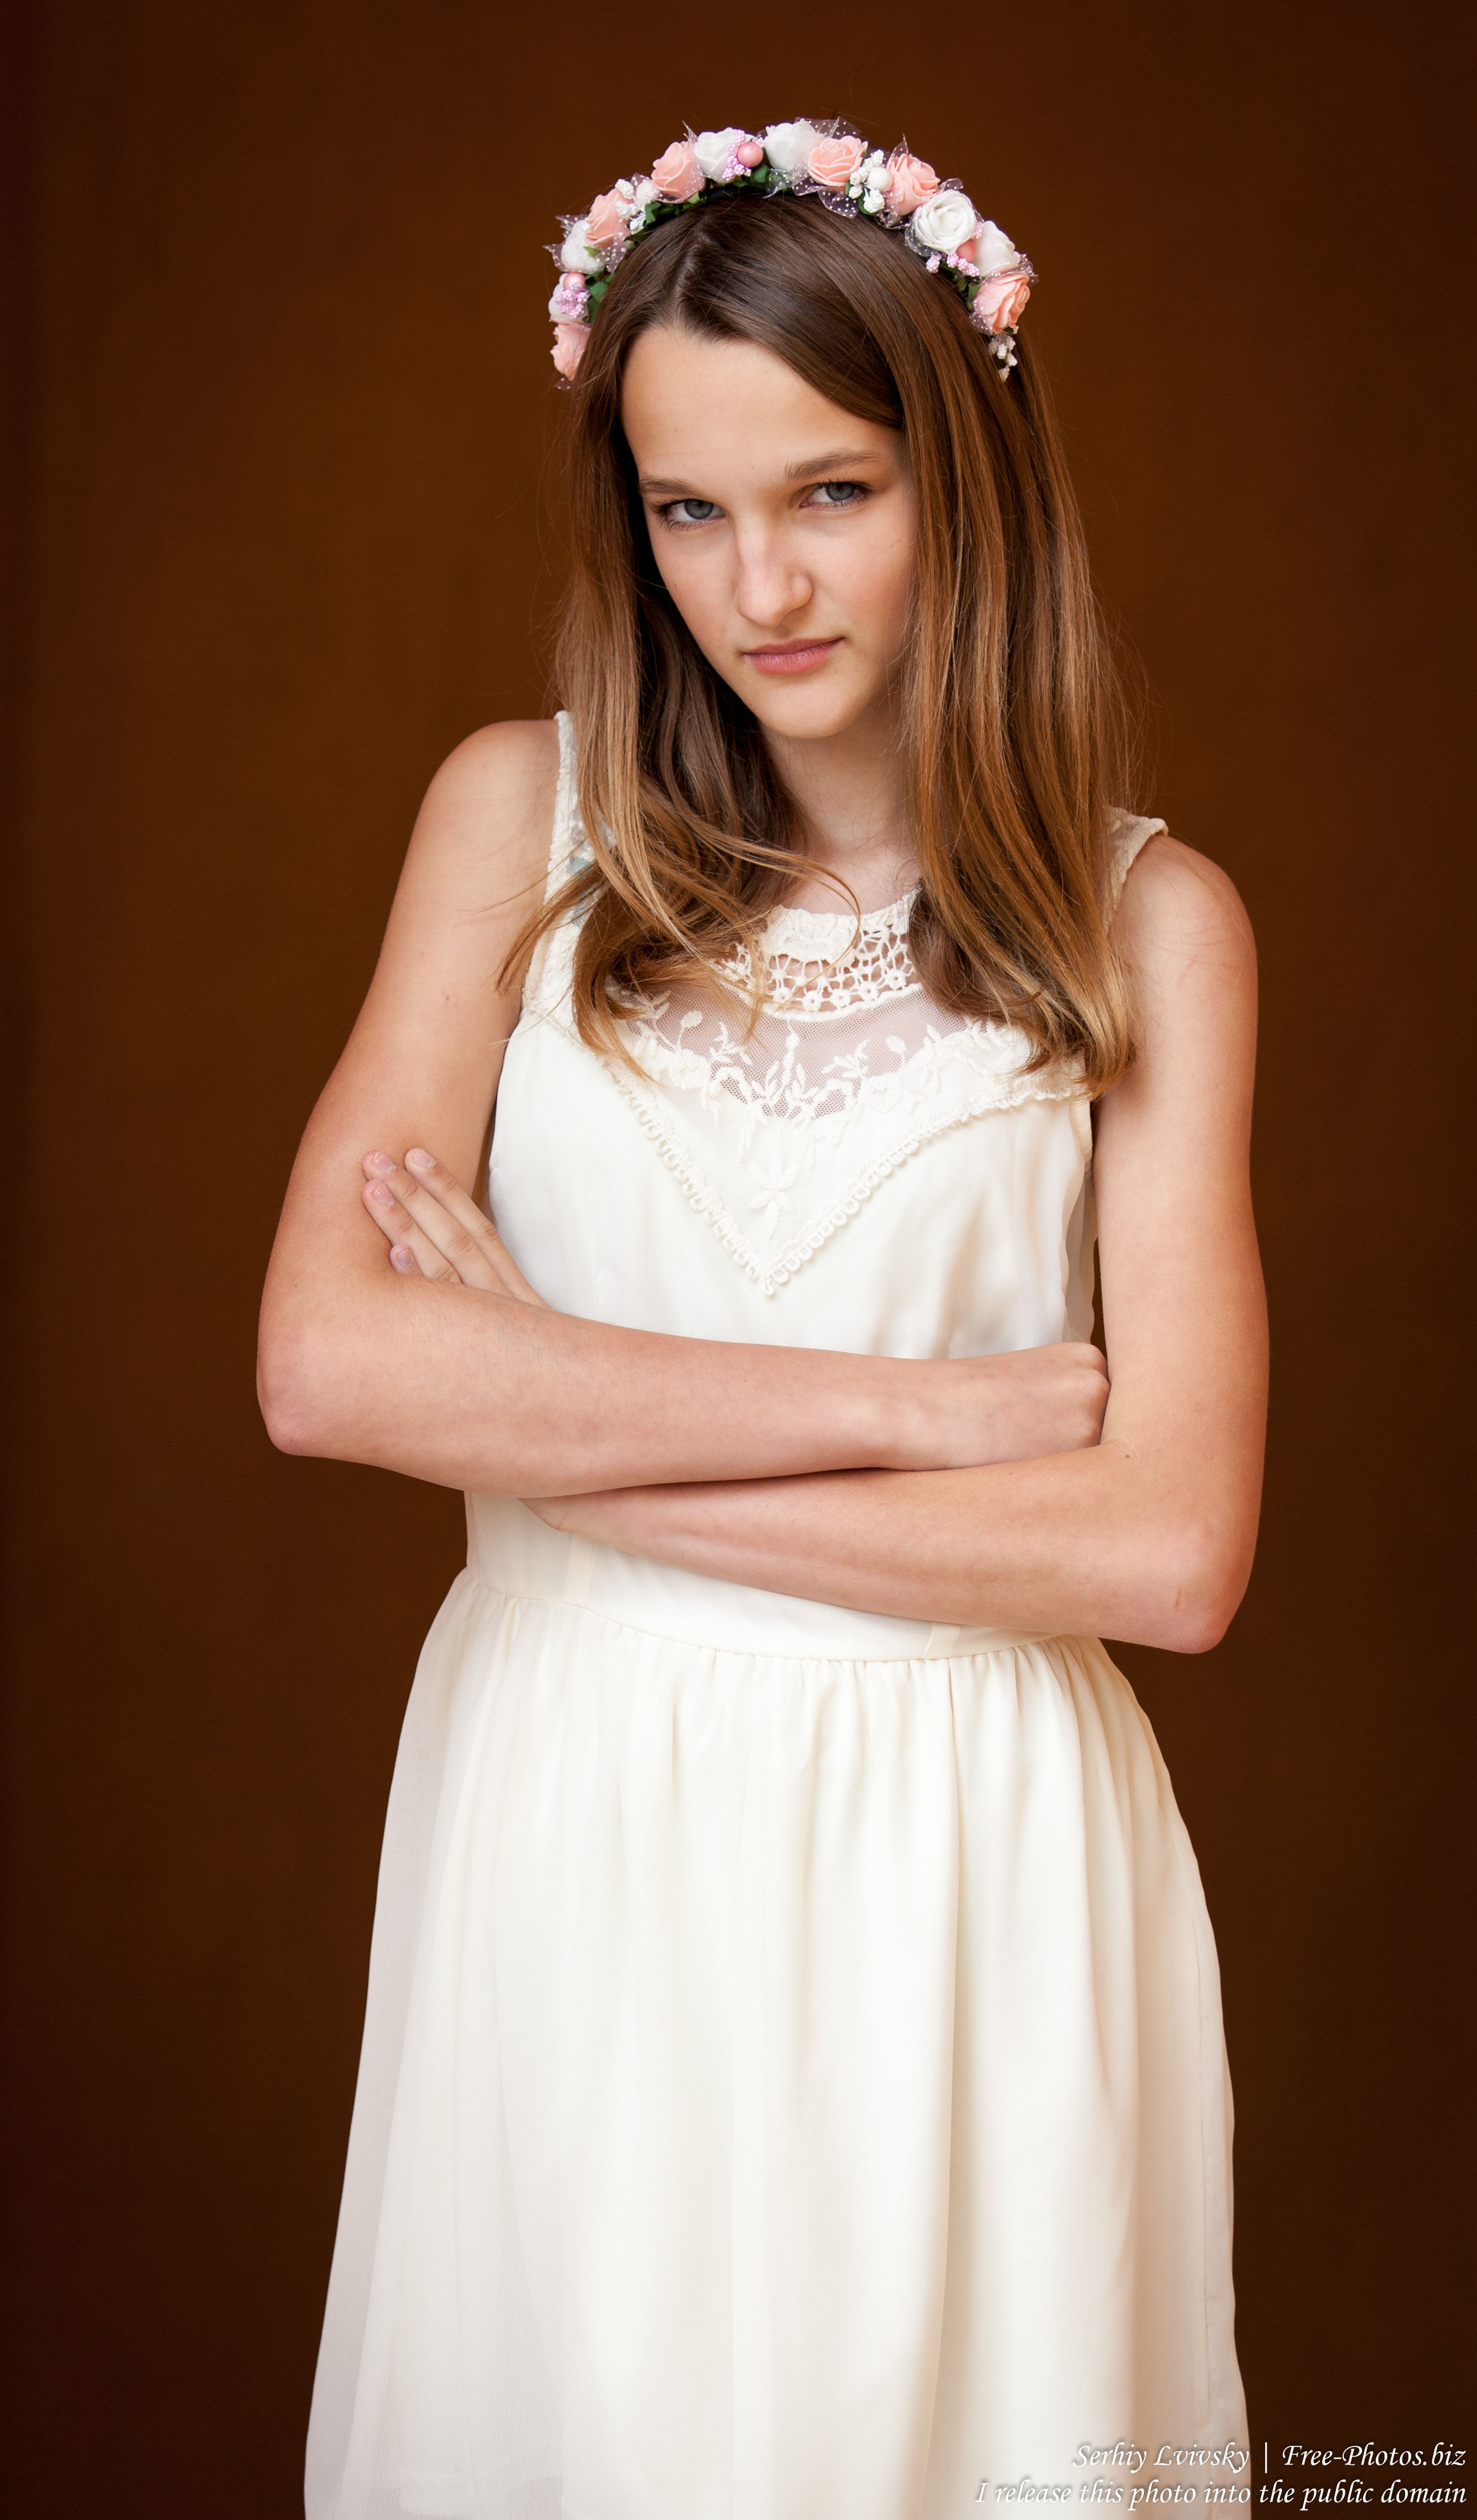 a 13-year-old Catholic girl in a white dress photographed in June 2015, picture 13